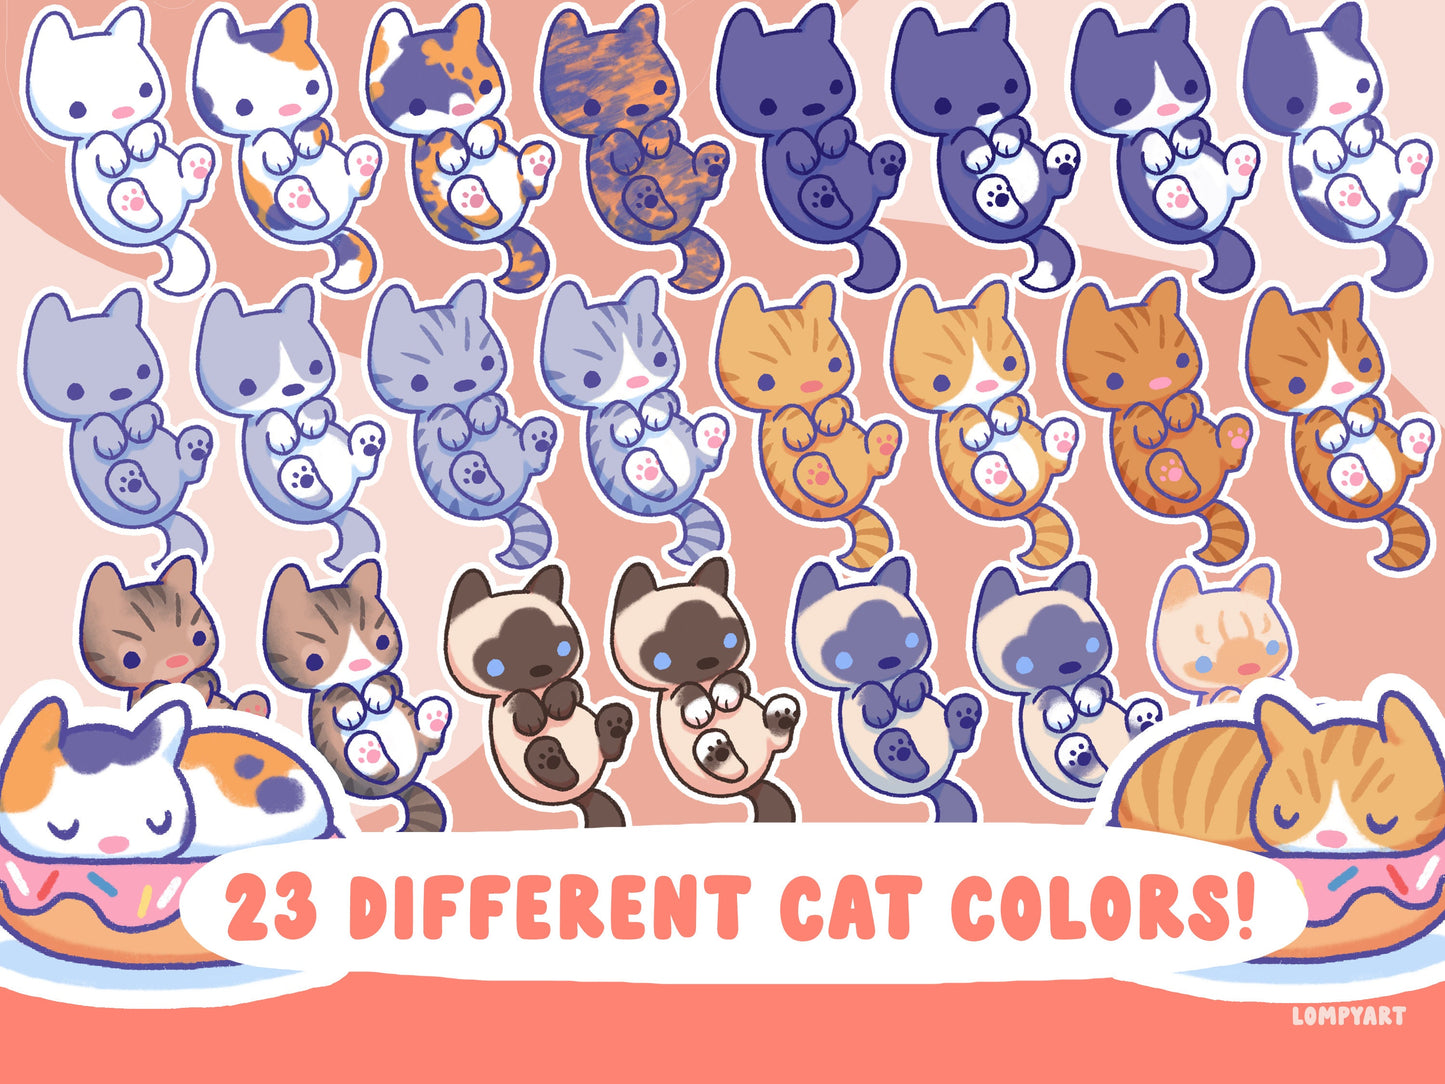 Choose your Cat color! Cat Sticker Pack Custom (23 different breeds, siamese ragdoll tabby tuxedo calico tortie tortoiseshell)